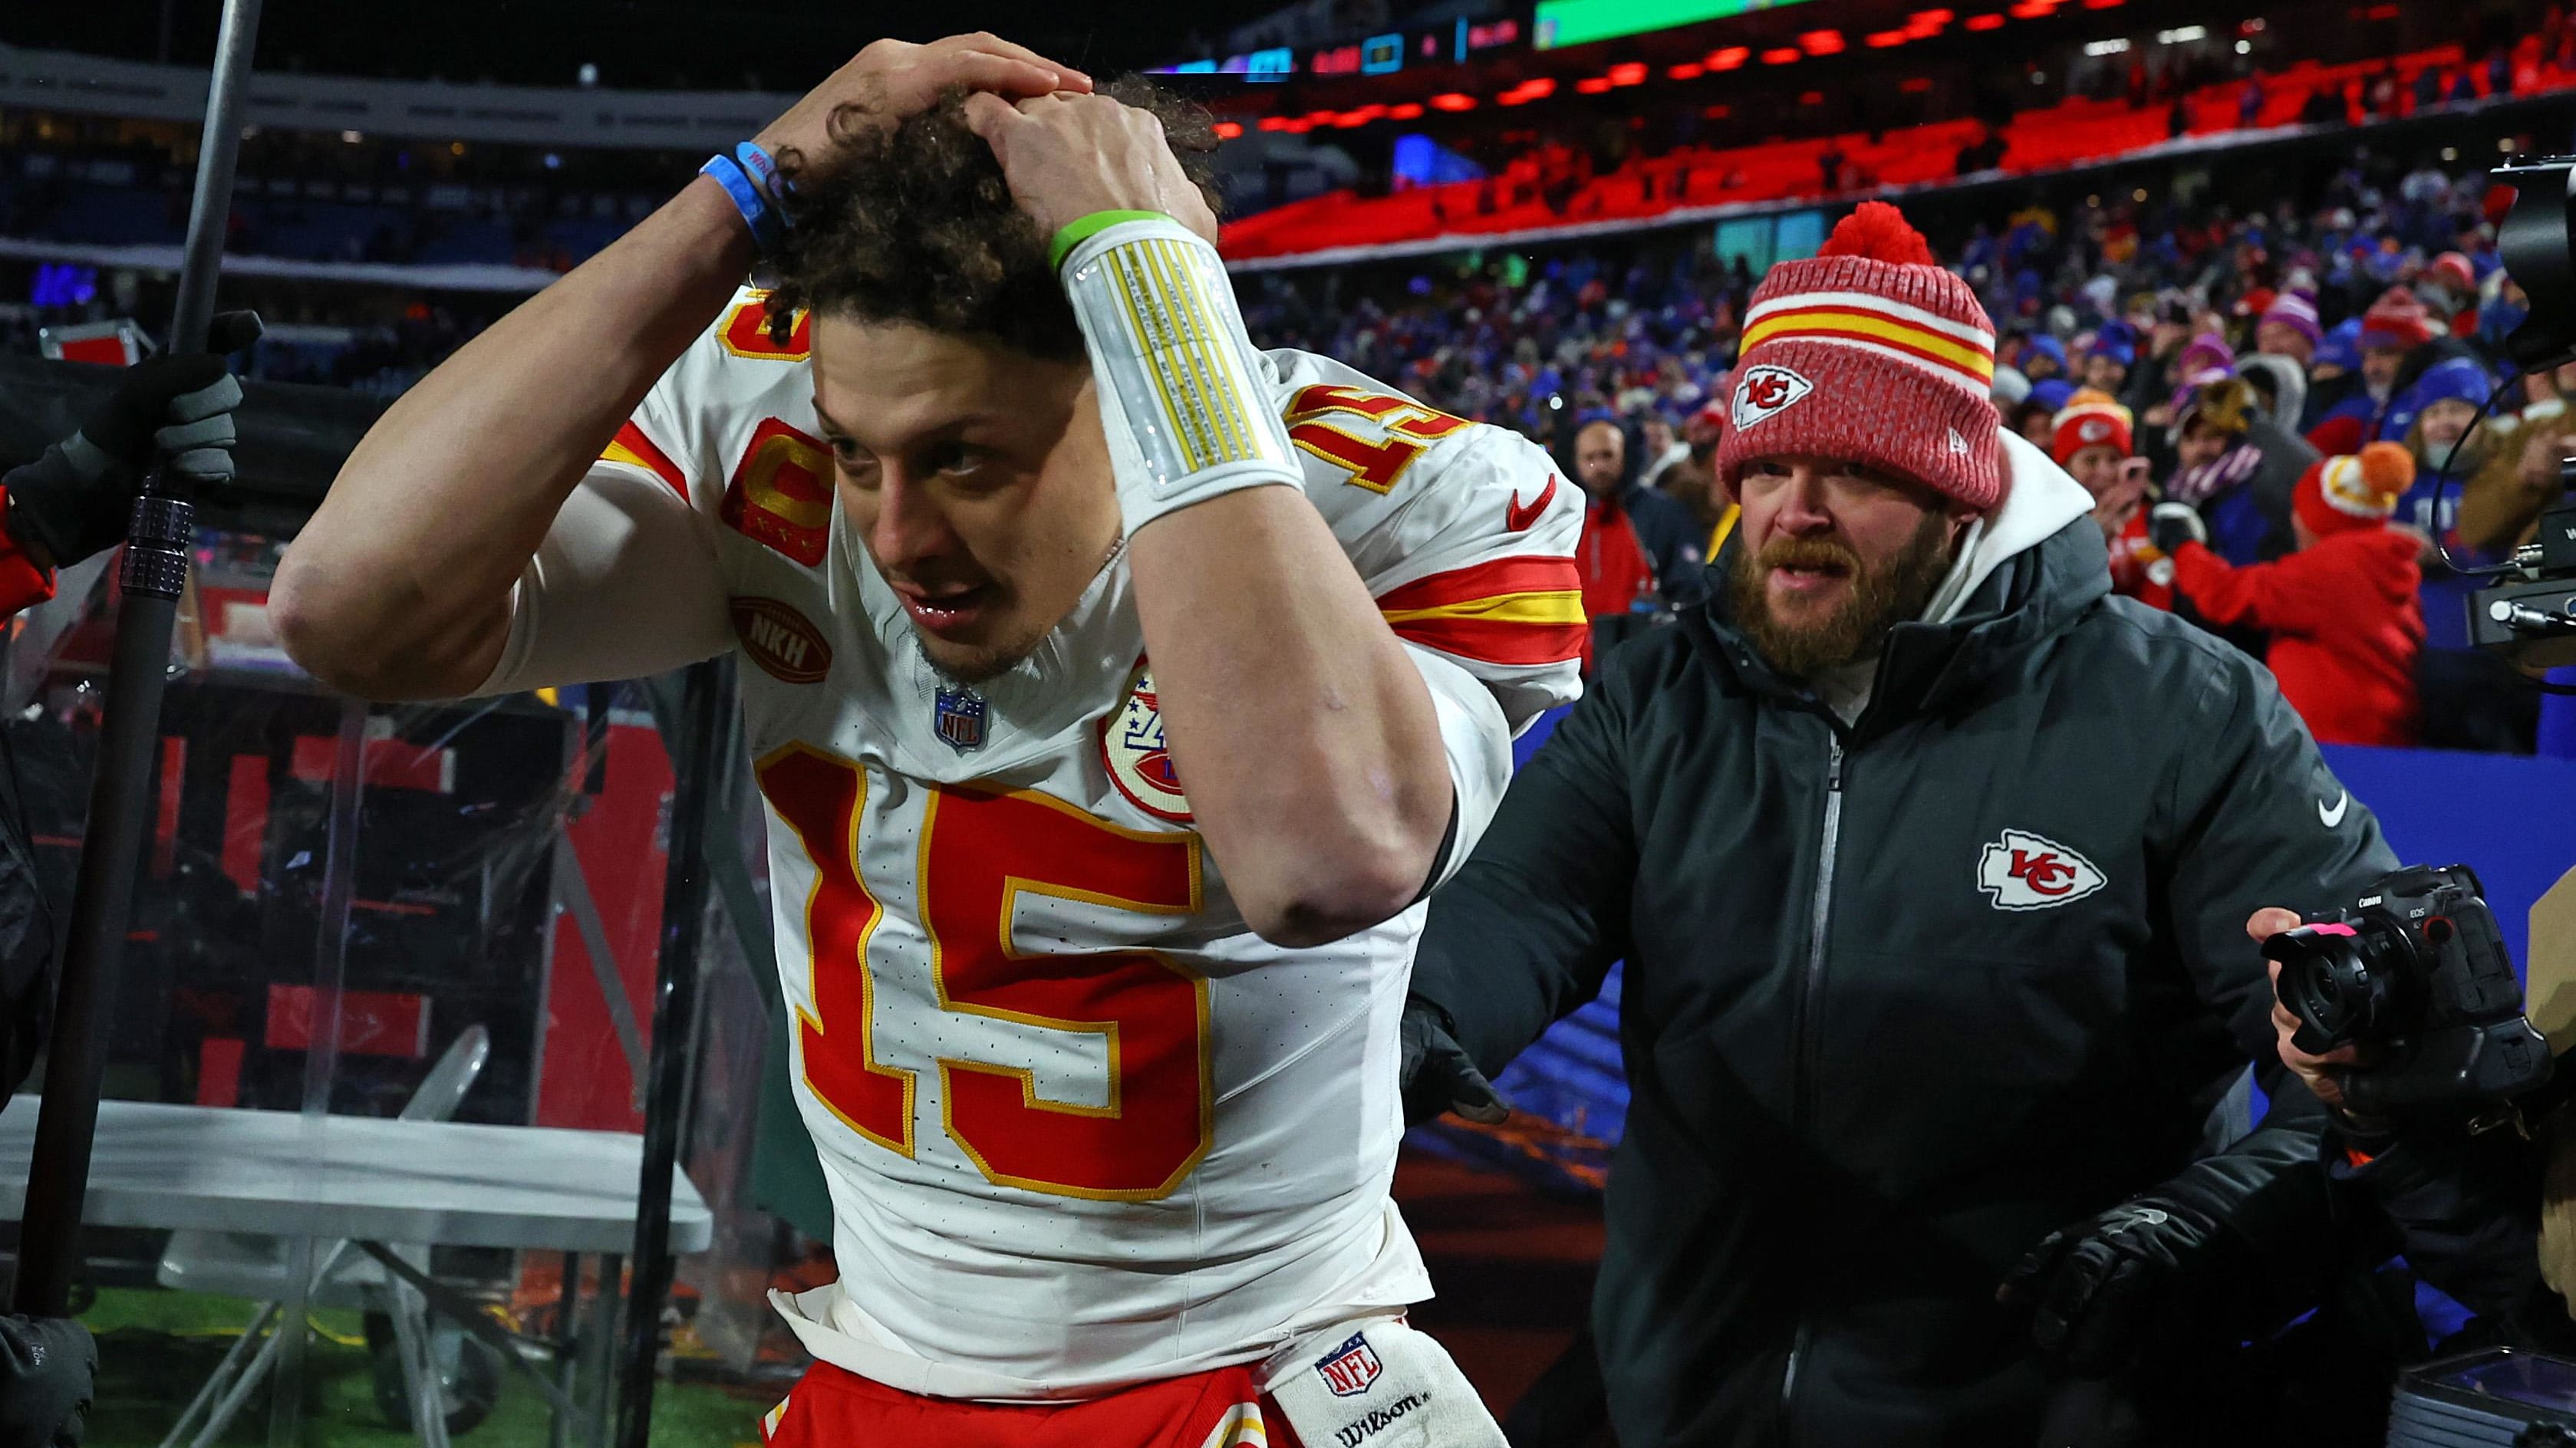 Patrick Mahomes covers his head as he walks off the field